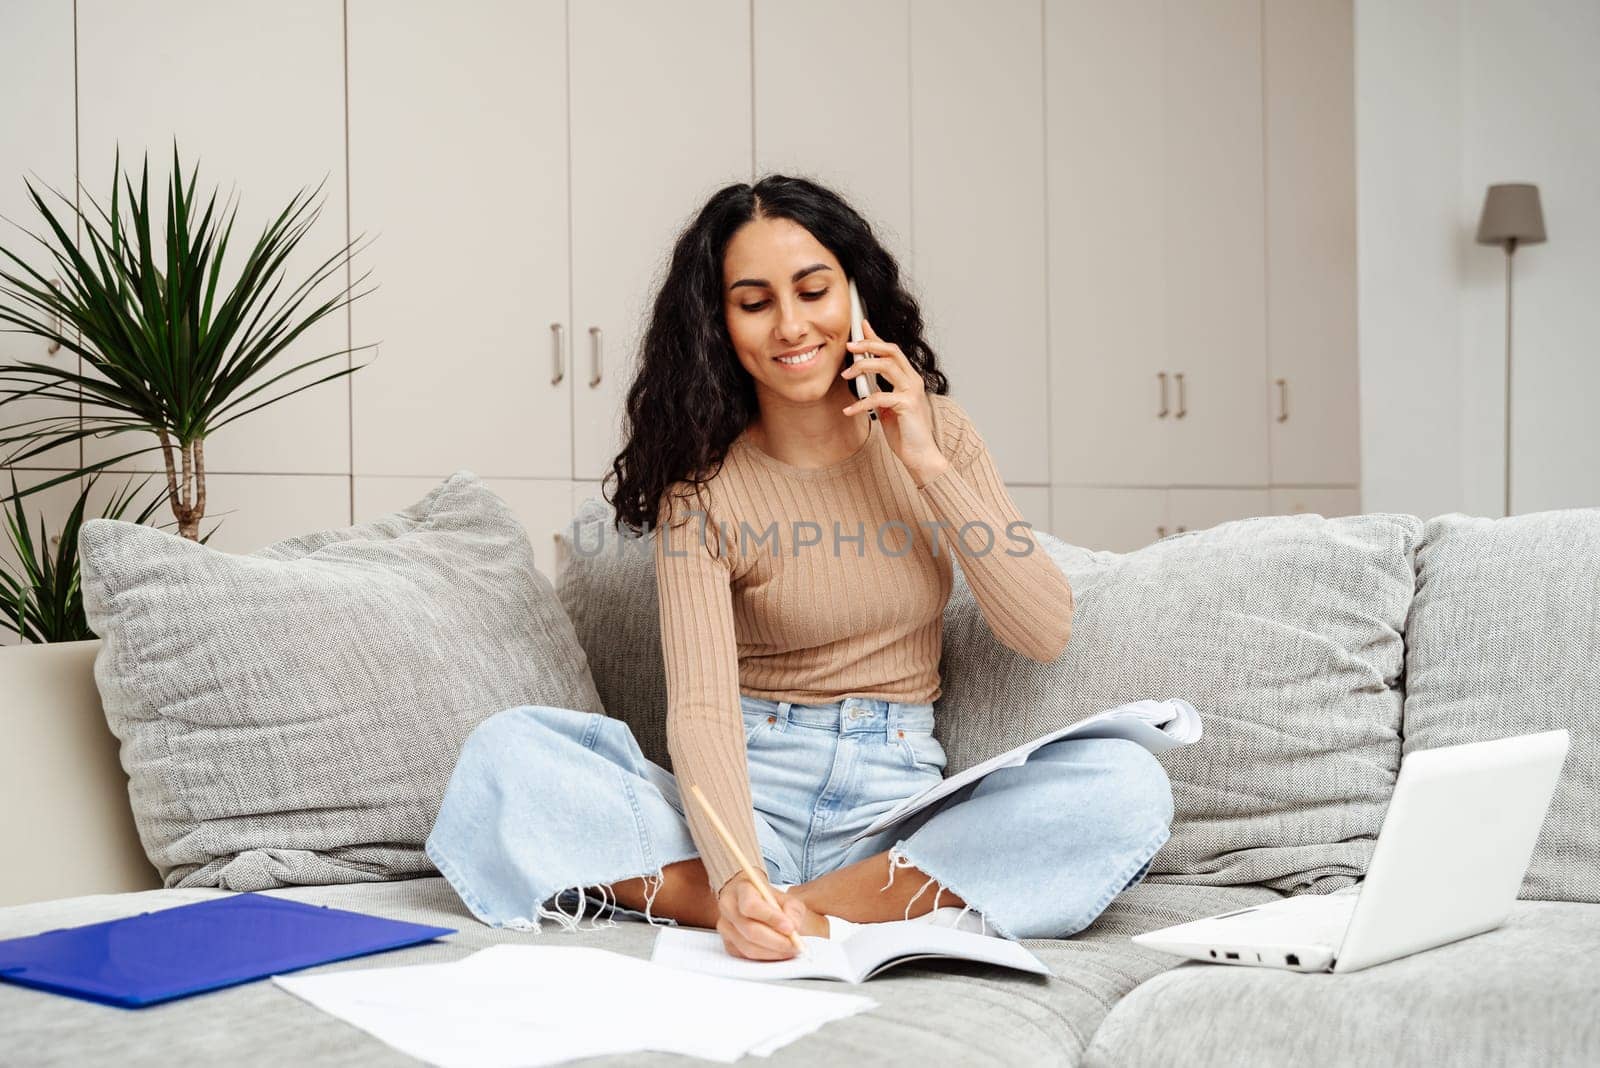 Young beautiful female student of Arab appearance sits on the sofa at home and studies. She holds a phone in one hand and takes notes in the other. Carries on a pleasant conversation about the subject of the task.